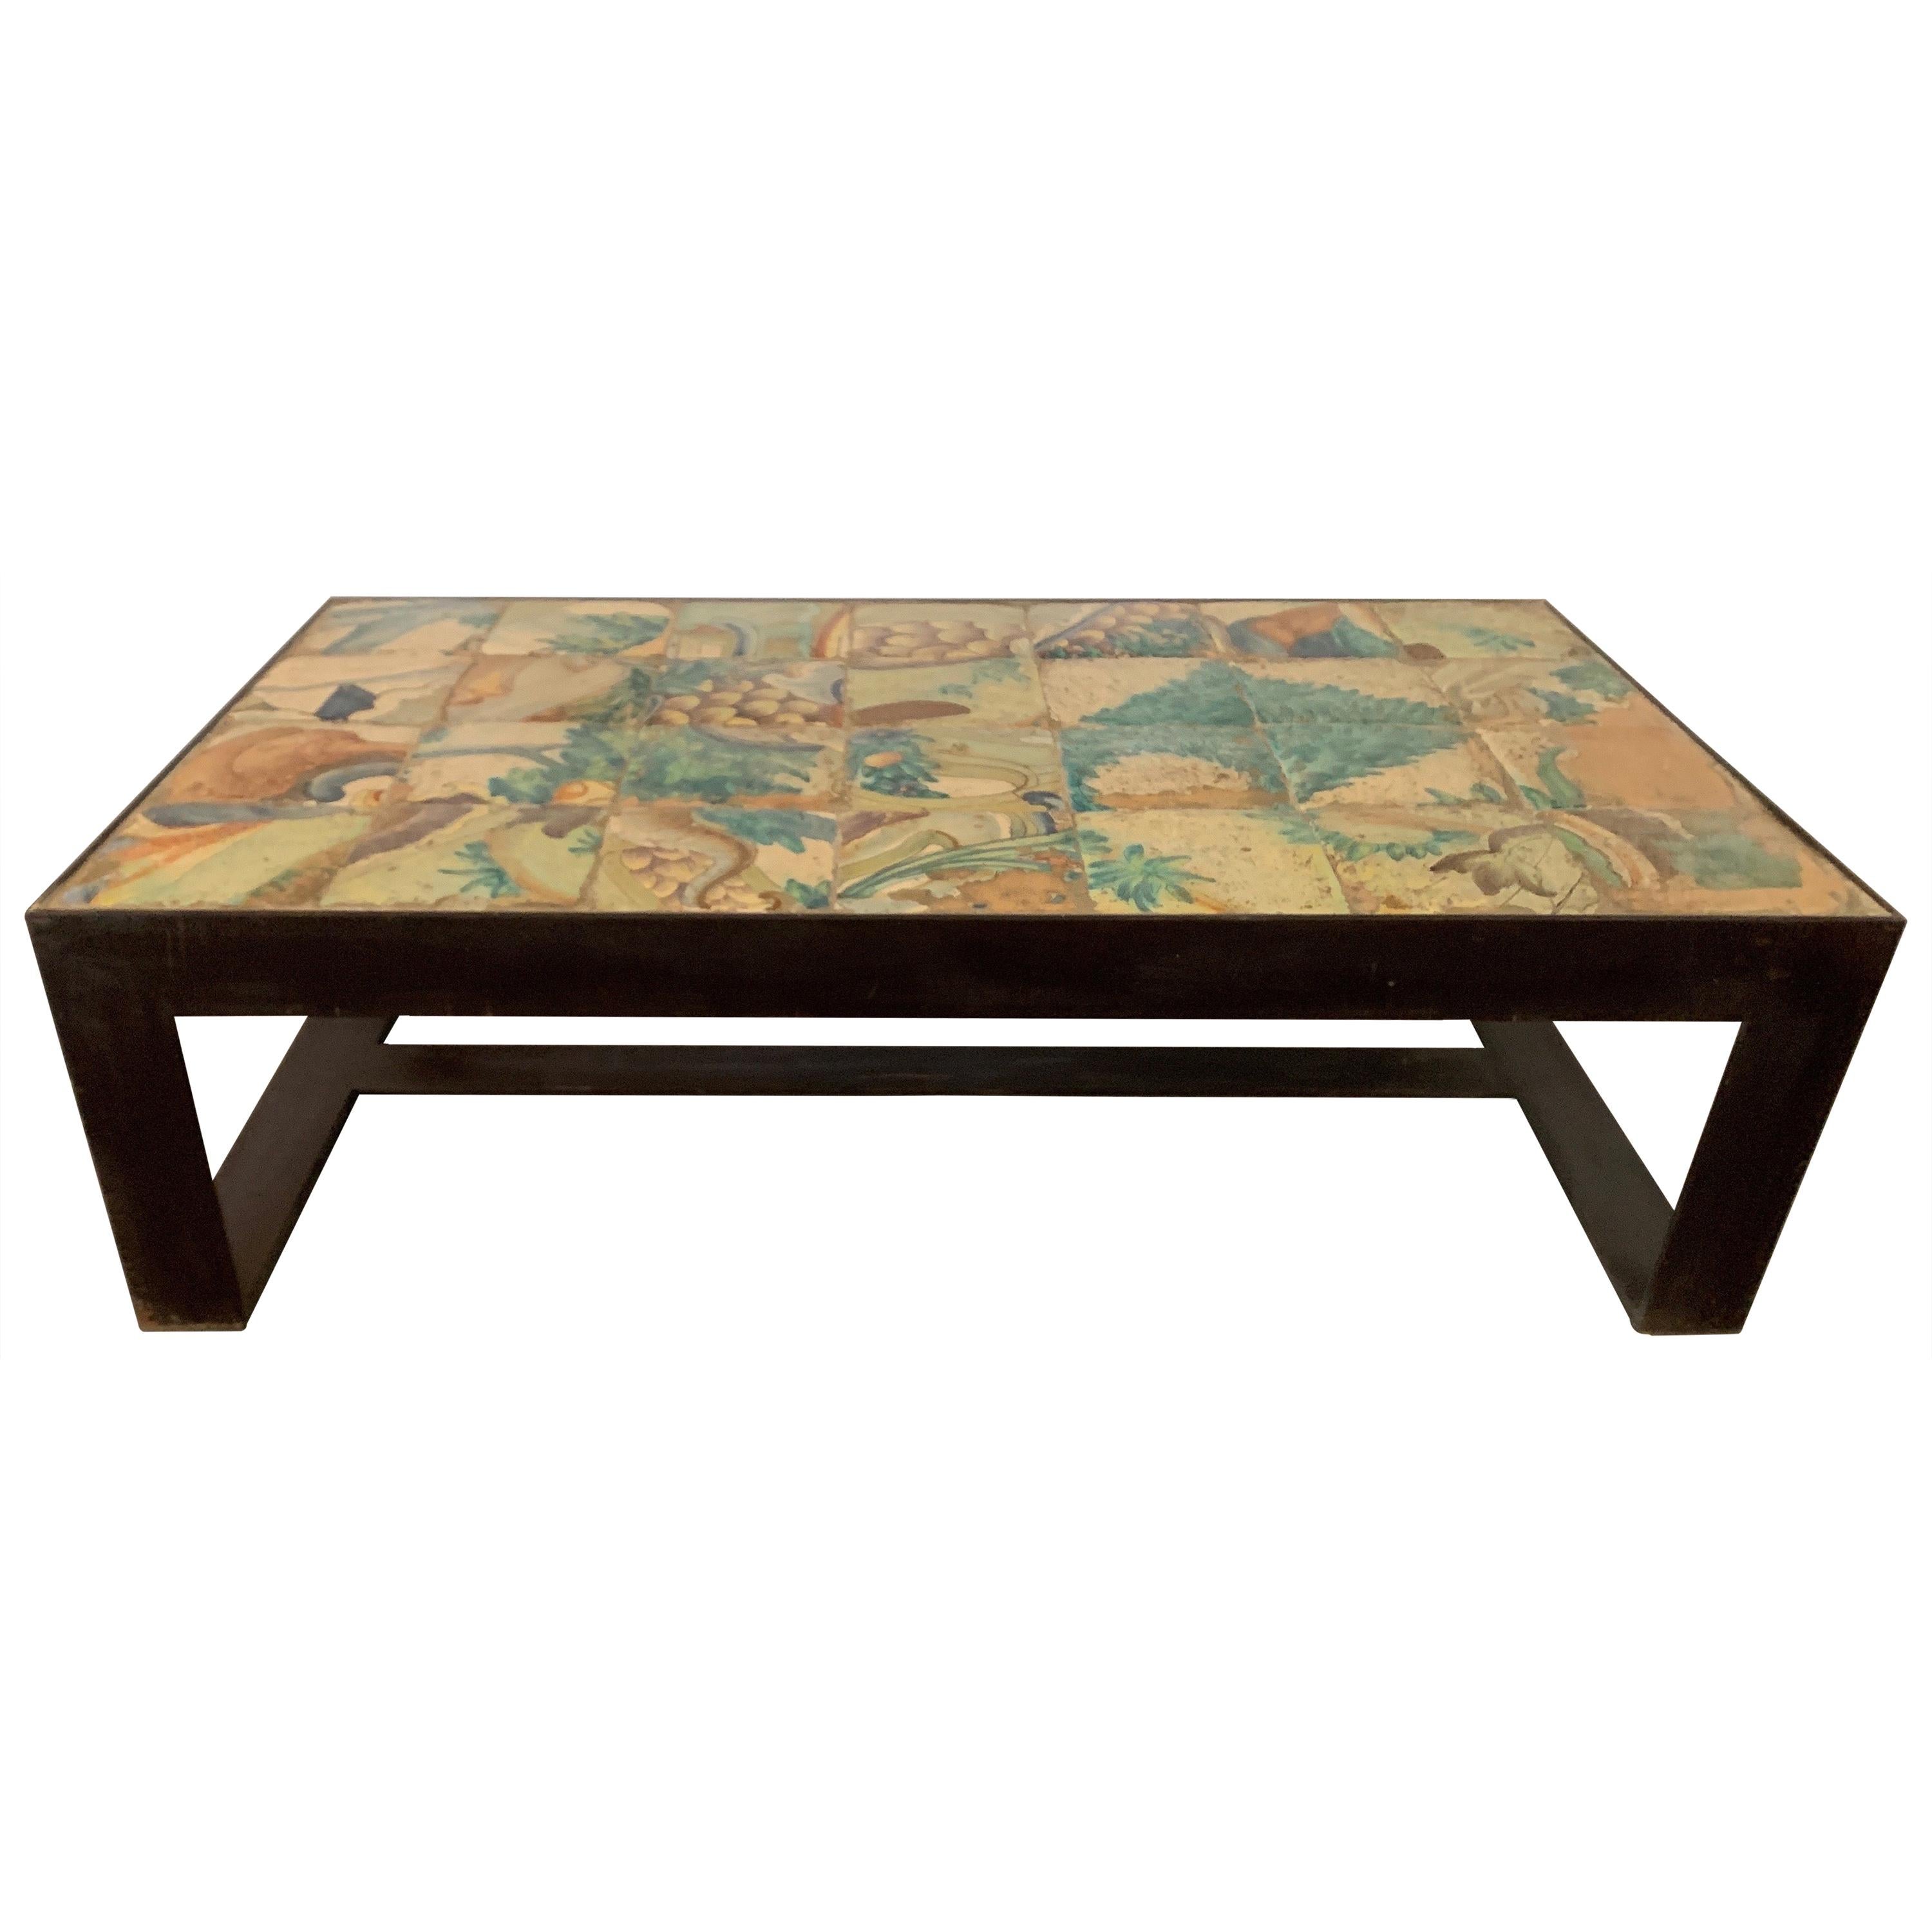 Antica Collection Fabrication Iron Table with 17th Century Portuguese Tiles